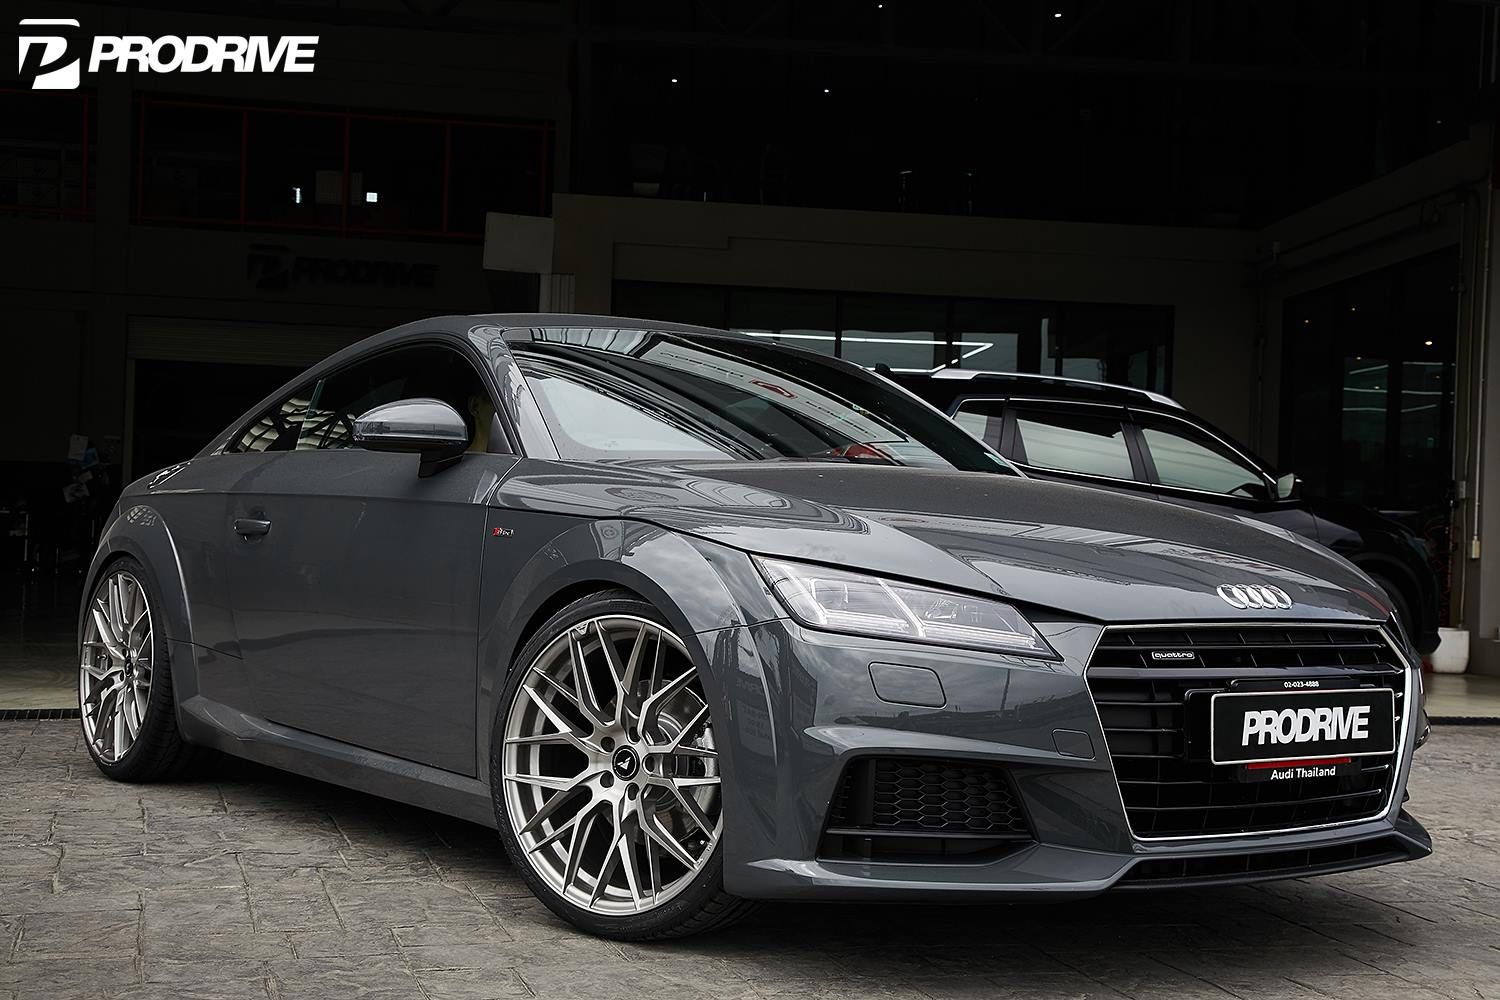 Audi A4 Equipped With Vorsteiner V-FF 107 Wheels!